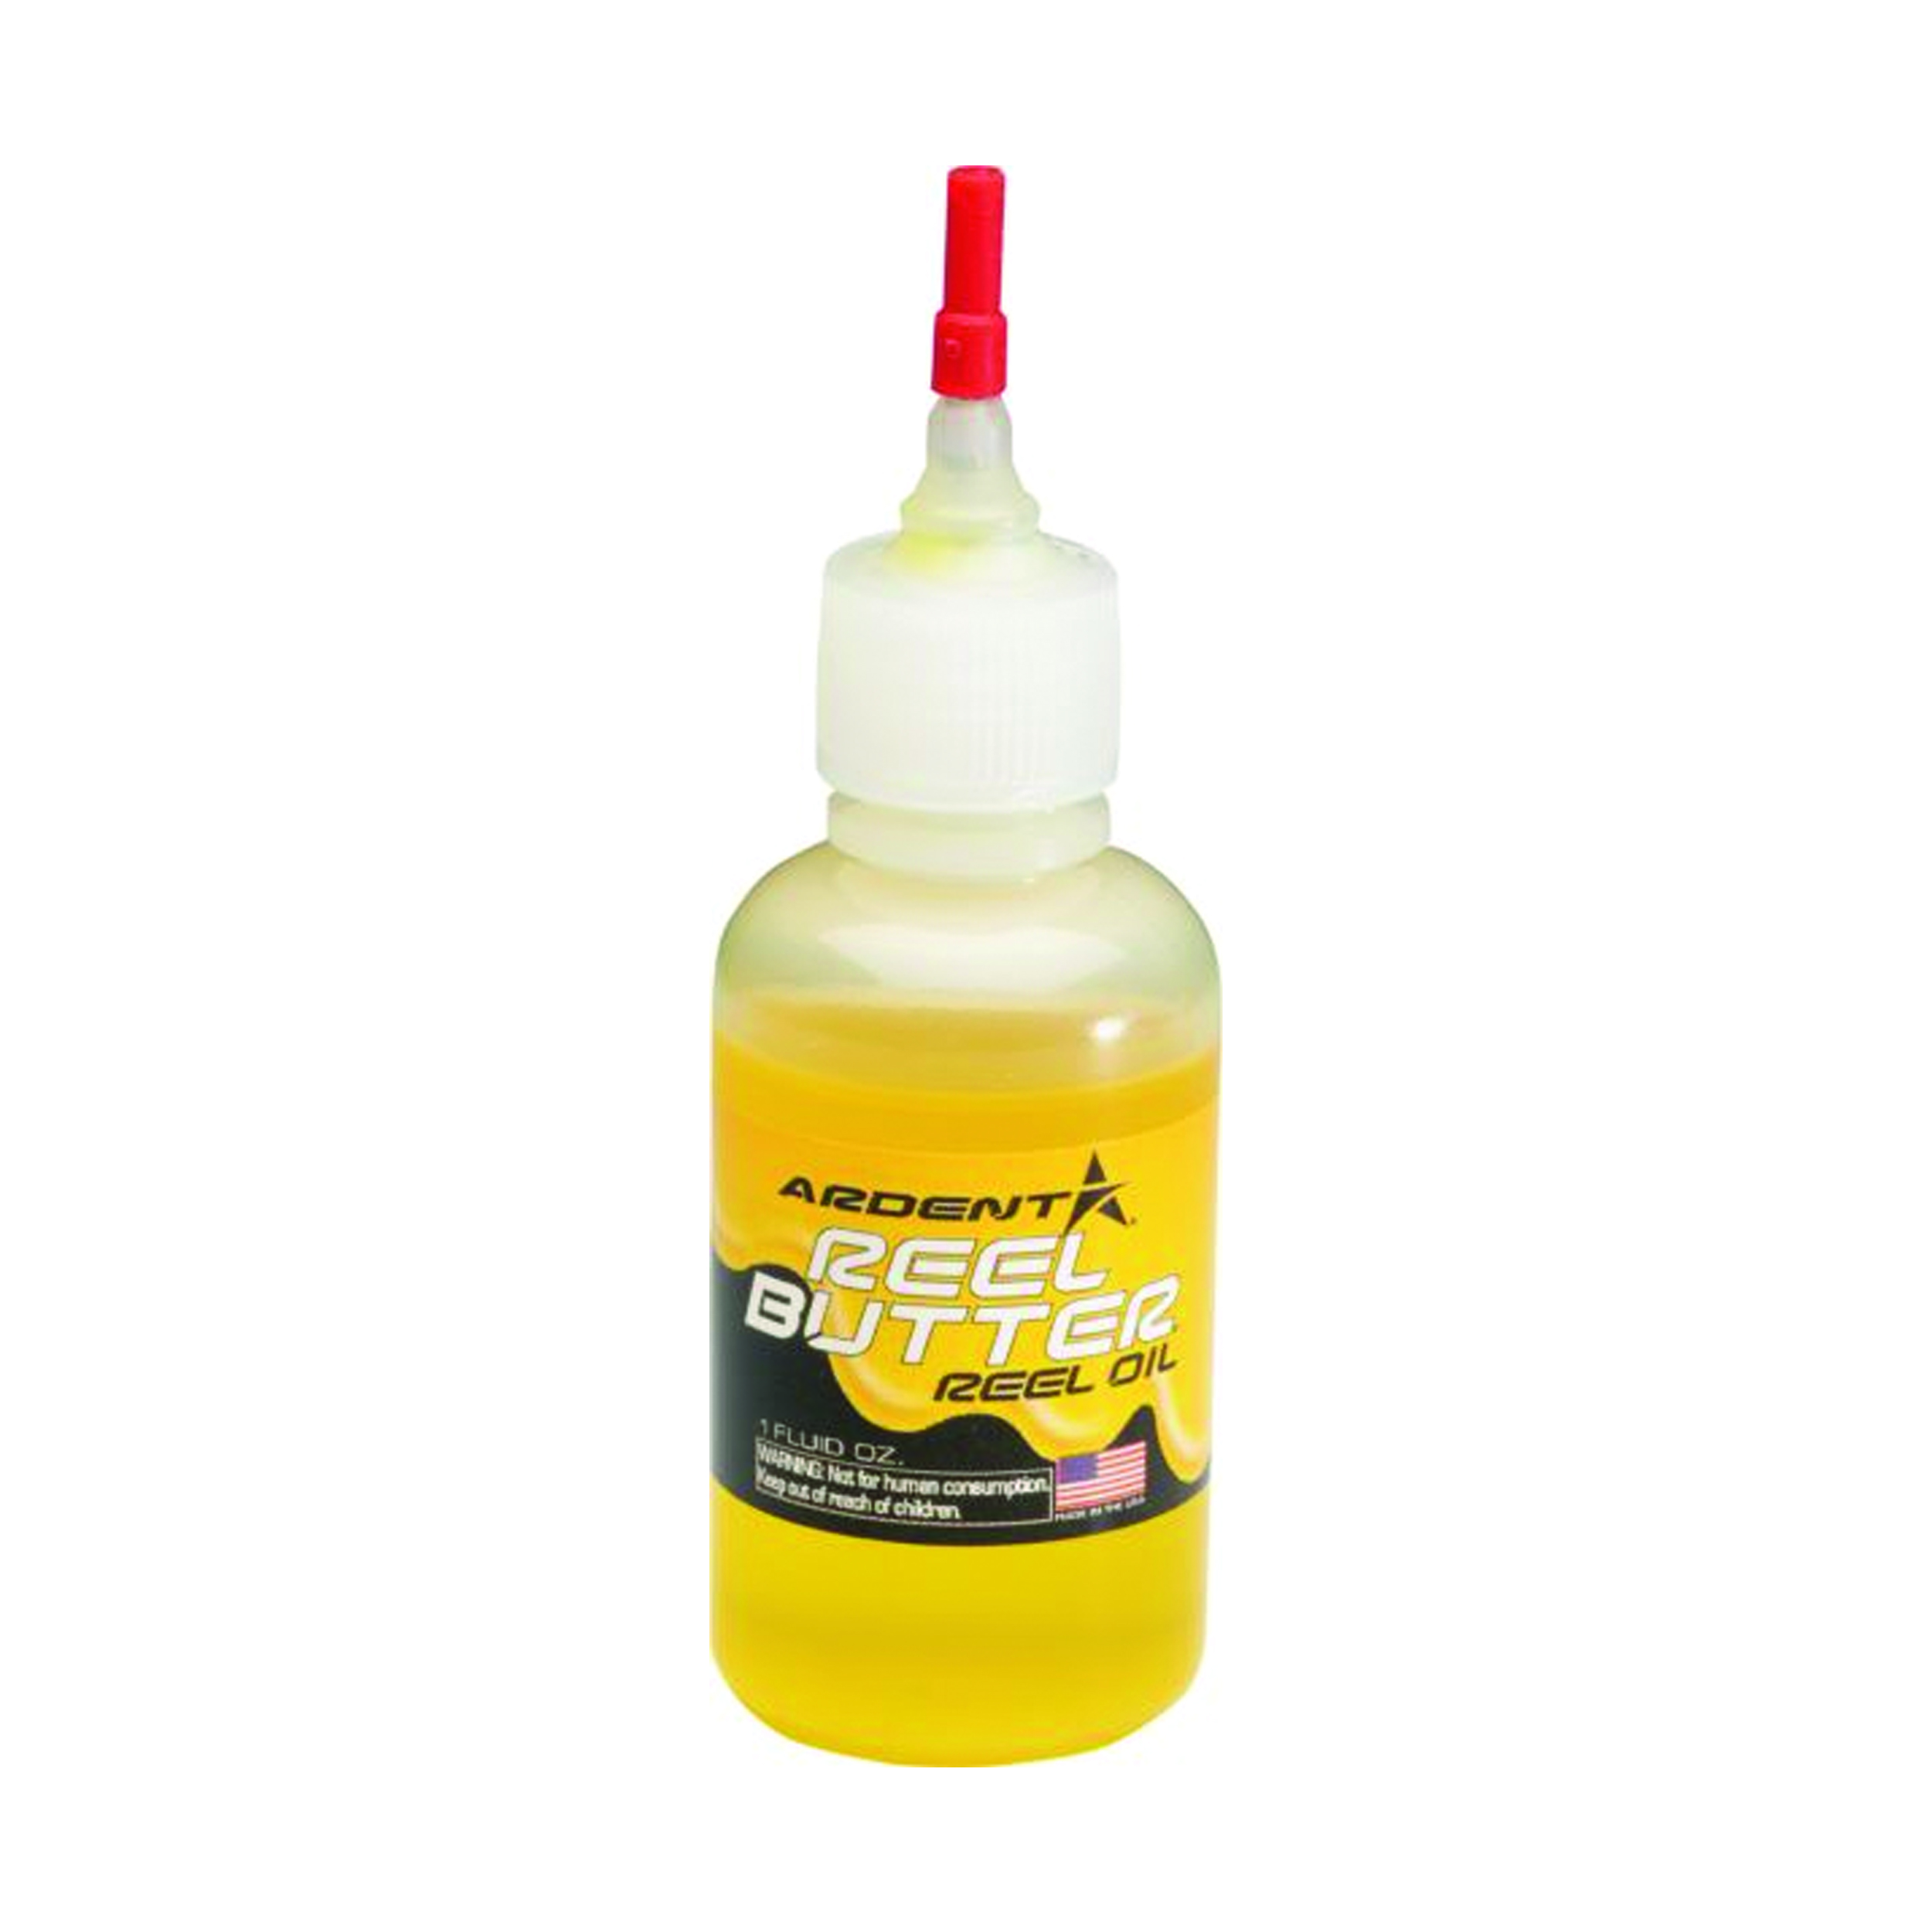 Ardent Reel Butter Oil, Fishing Reel Lubricant